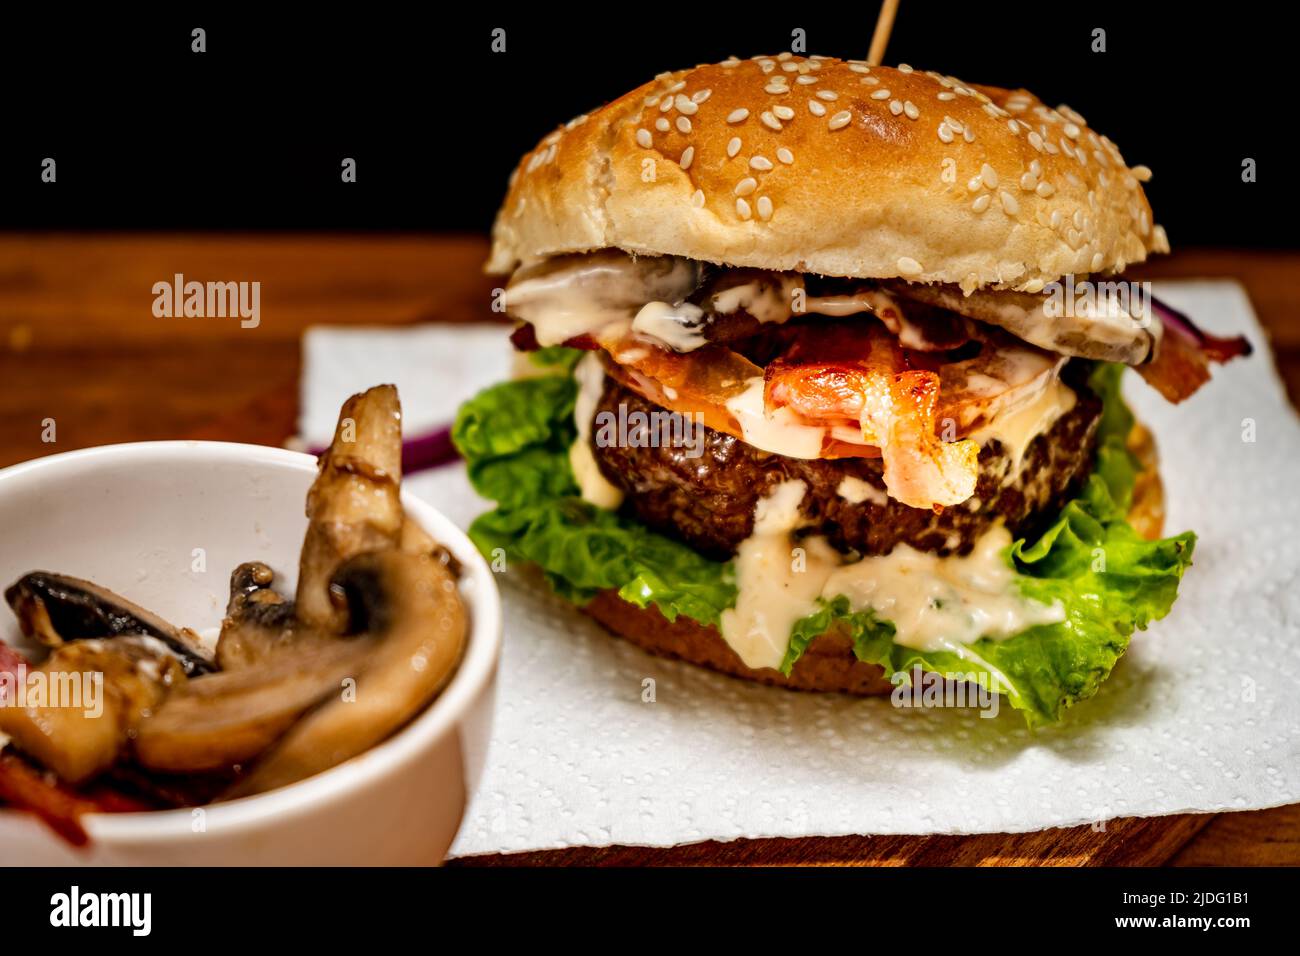 Homemade beef burger with lettuce, tomato, mushrooms, bacon and cheese on a wooden board with black background. Chopped view. Copy text. Home made, fa Stock Photo